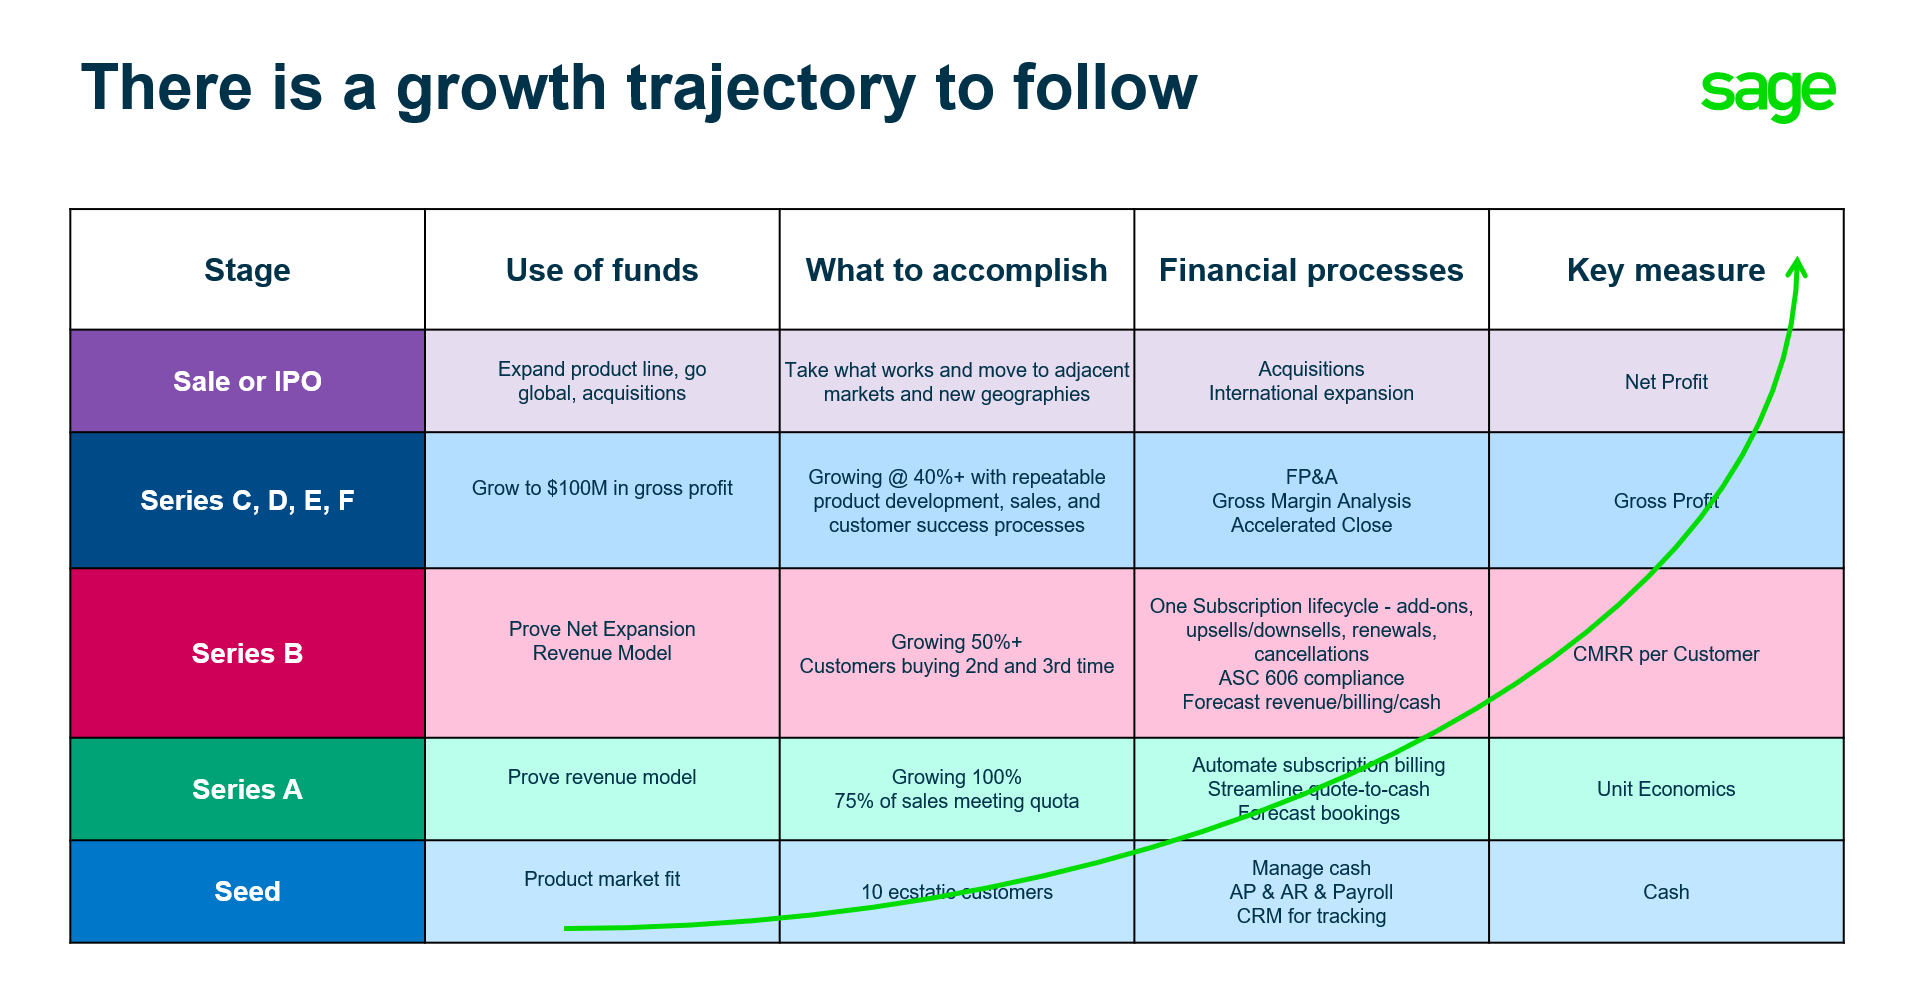 There is a growth trajectory to follow